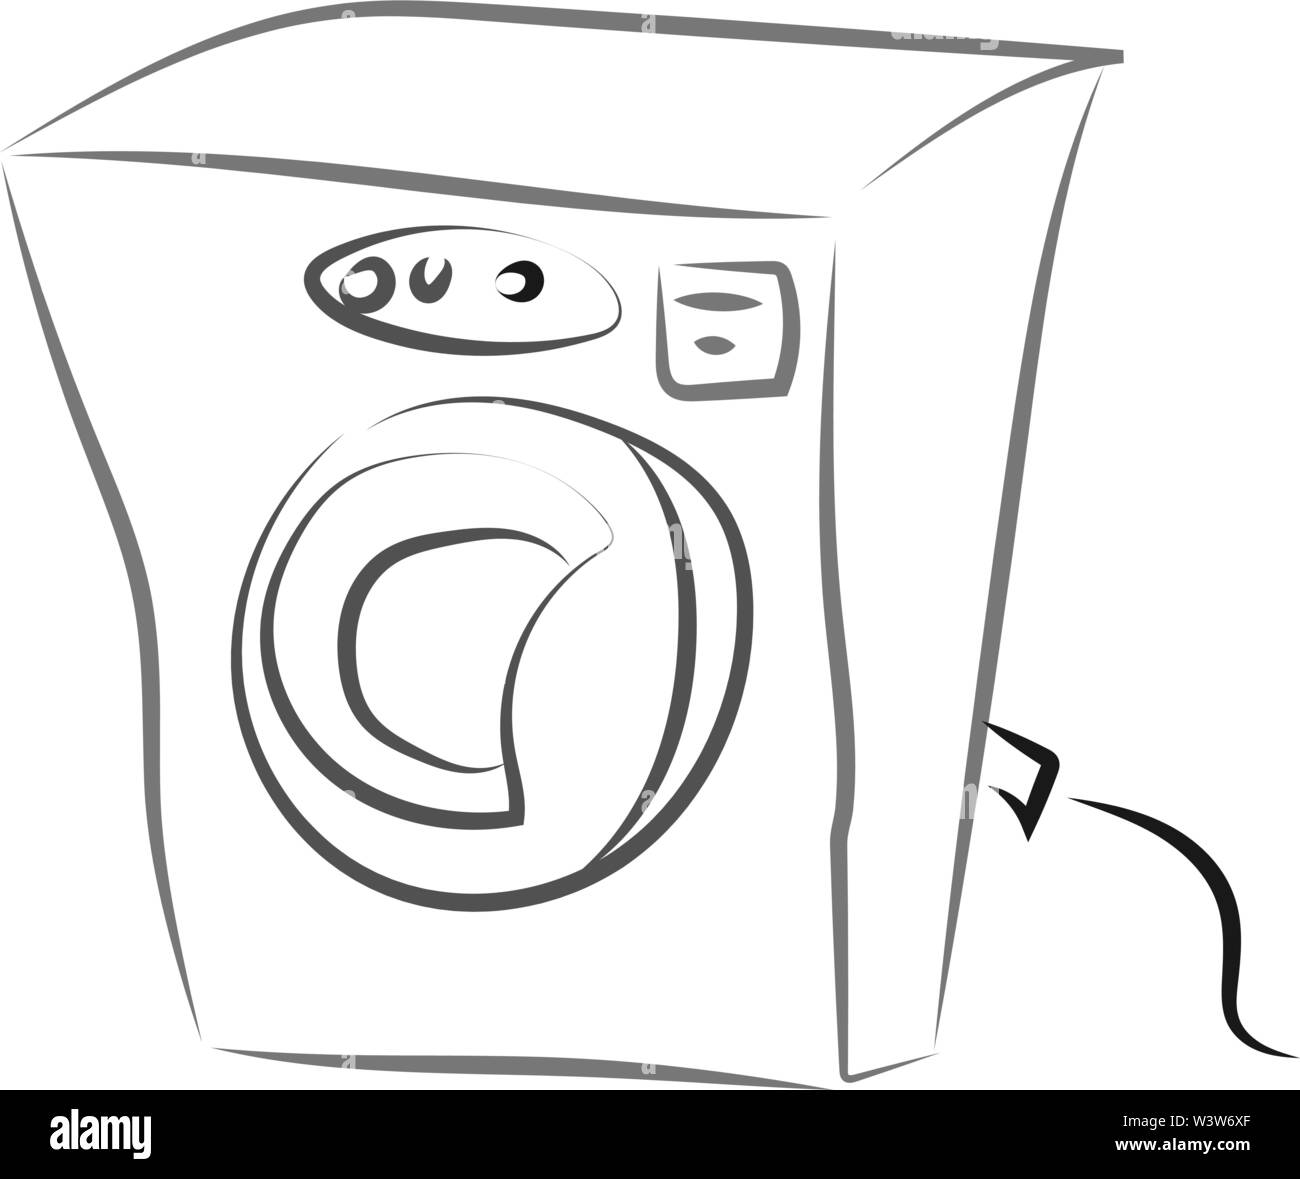 Washing machine drawing, illustration, vector on white background. Stock Vector